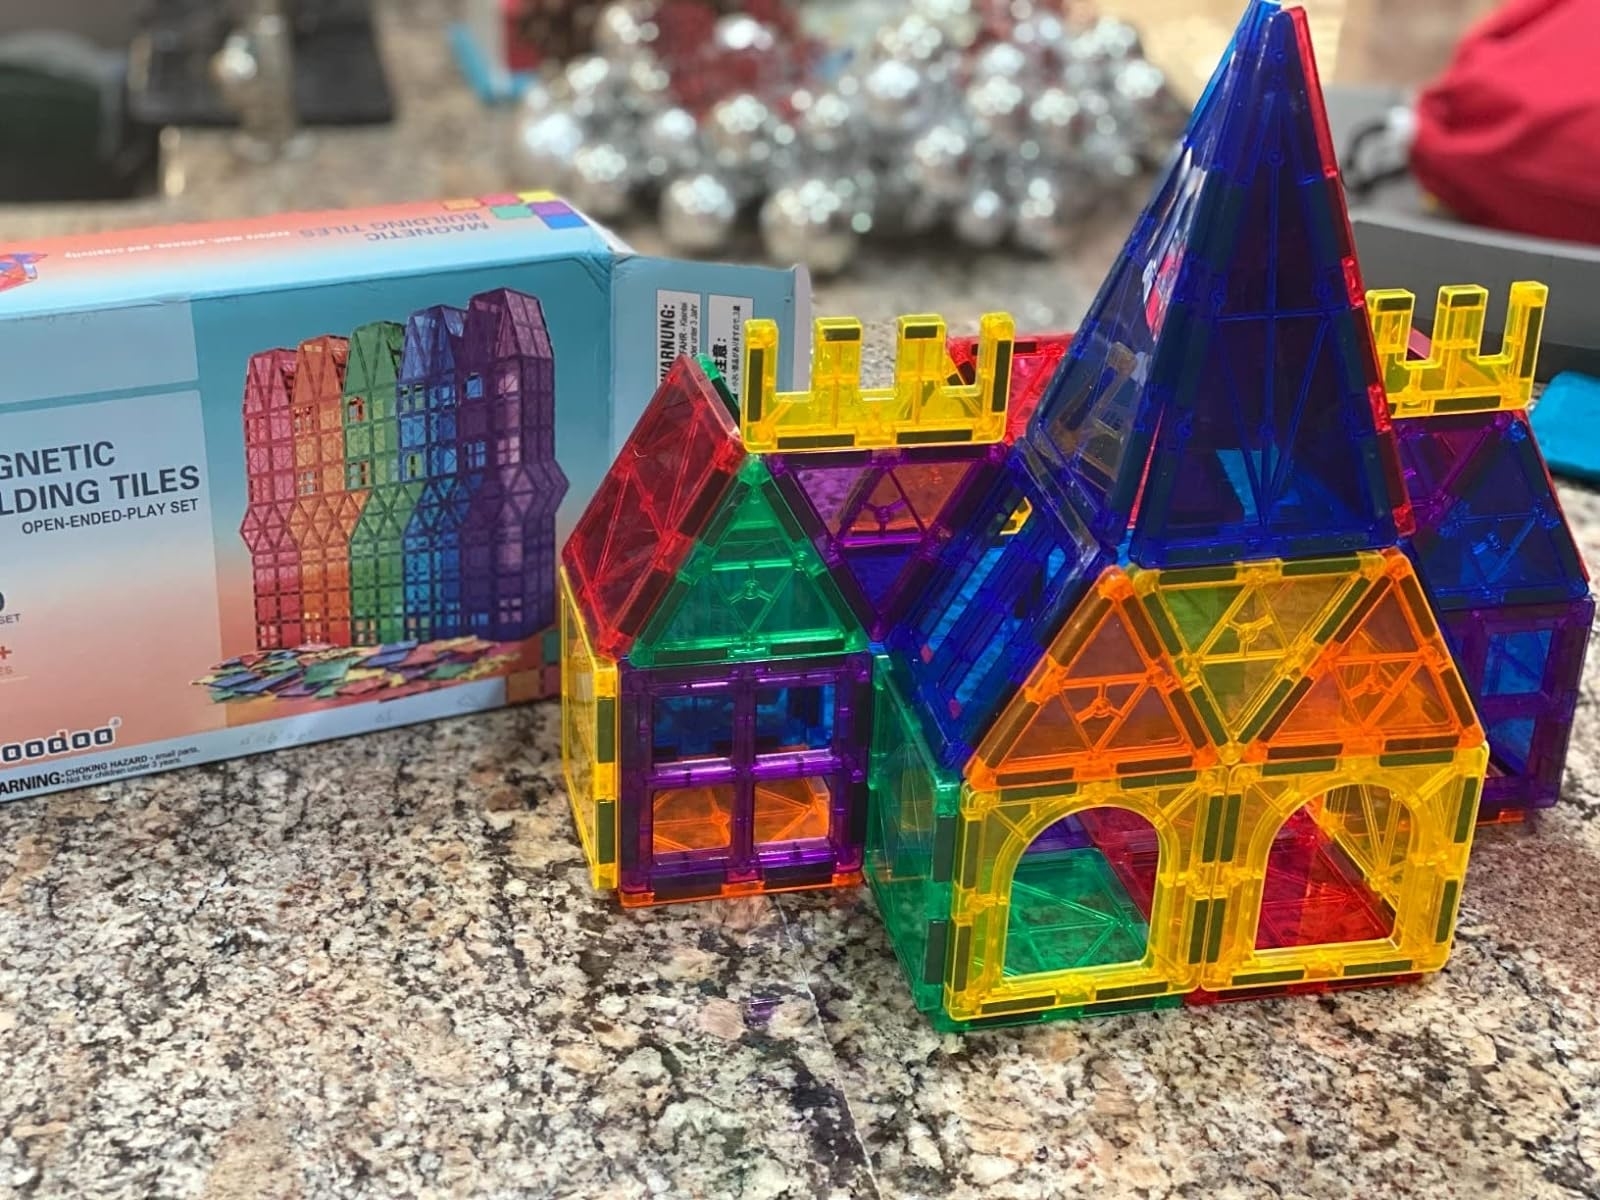 A set of colorful magnetic building tiles assembled into a house-like structure, with the product box in the background